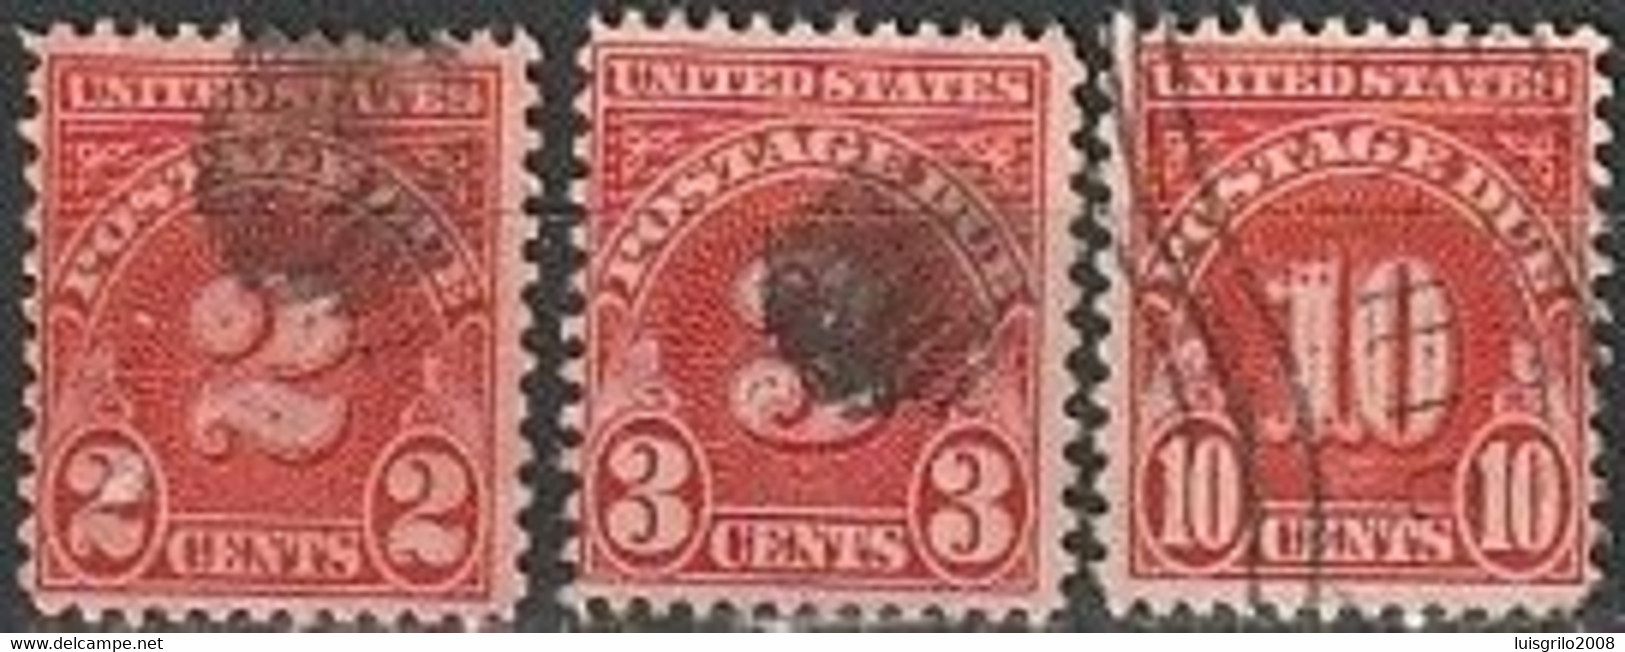 Postage Due -  United States, 1930 - Franqueo